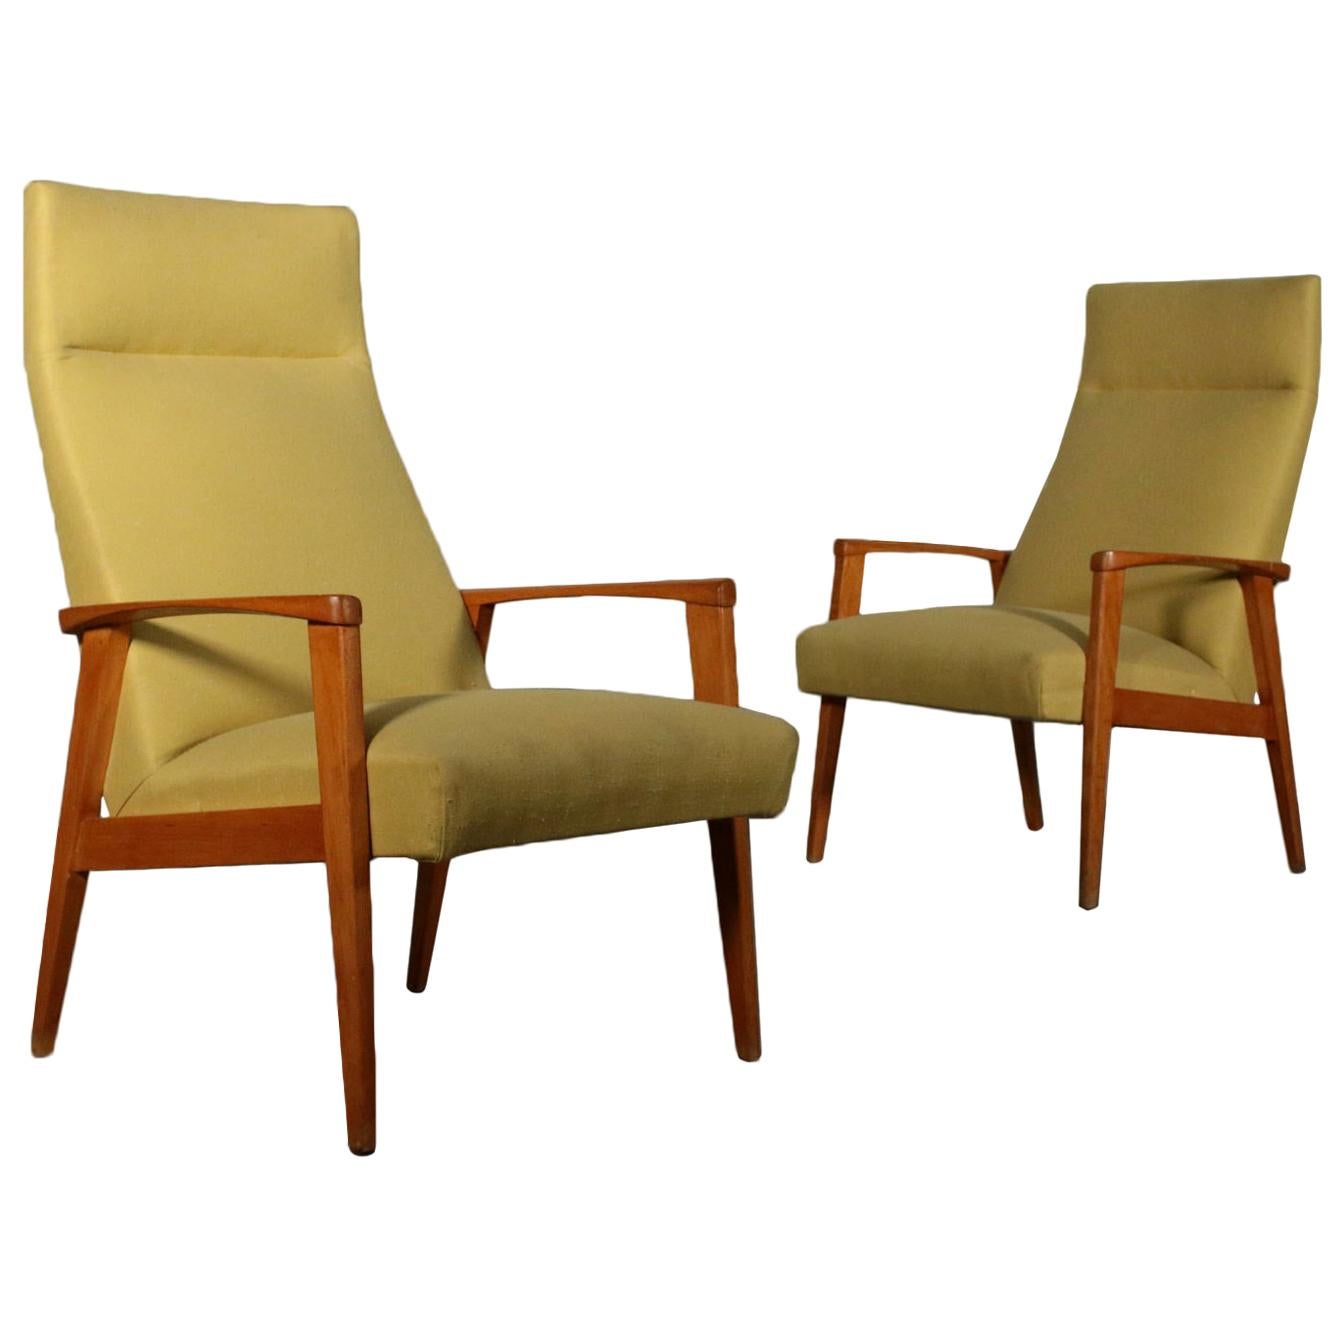 Pair of Armchairs Beech Fabric Upholstery Vintage, Italy, 1950s-1960s